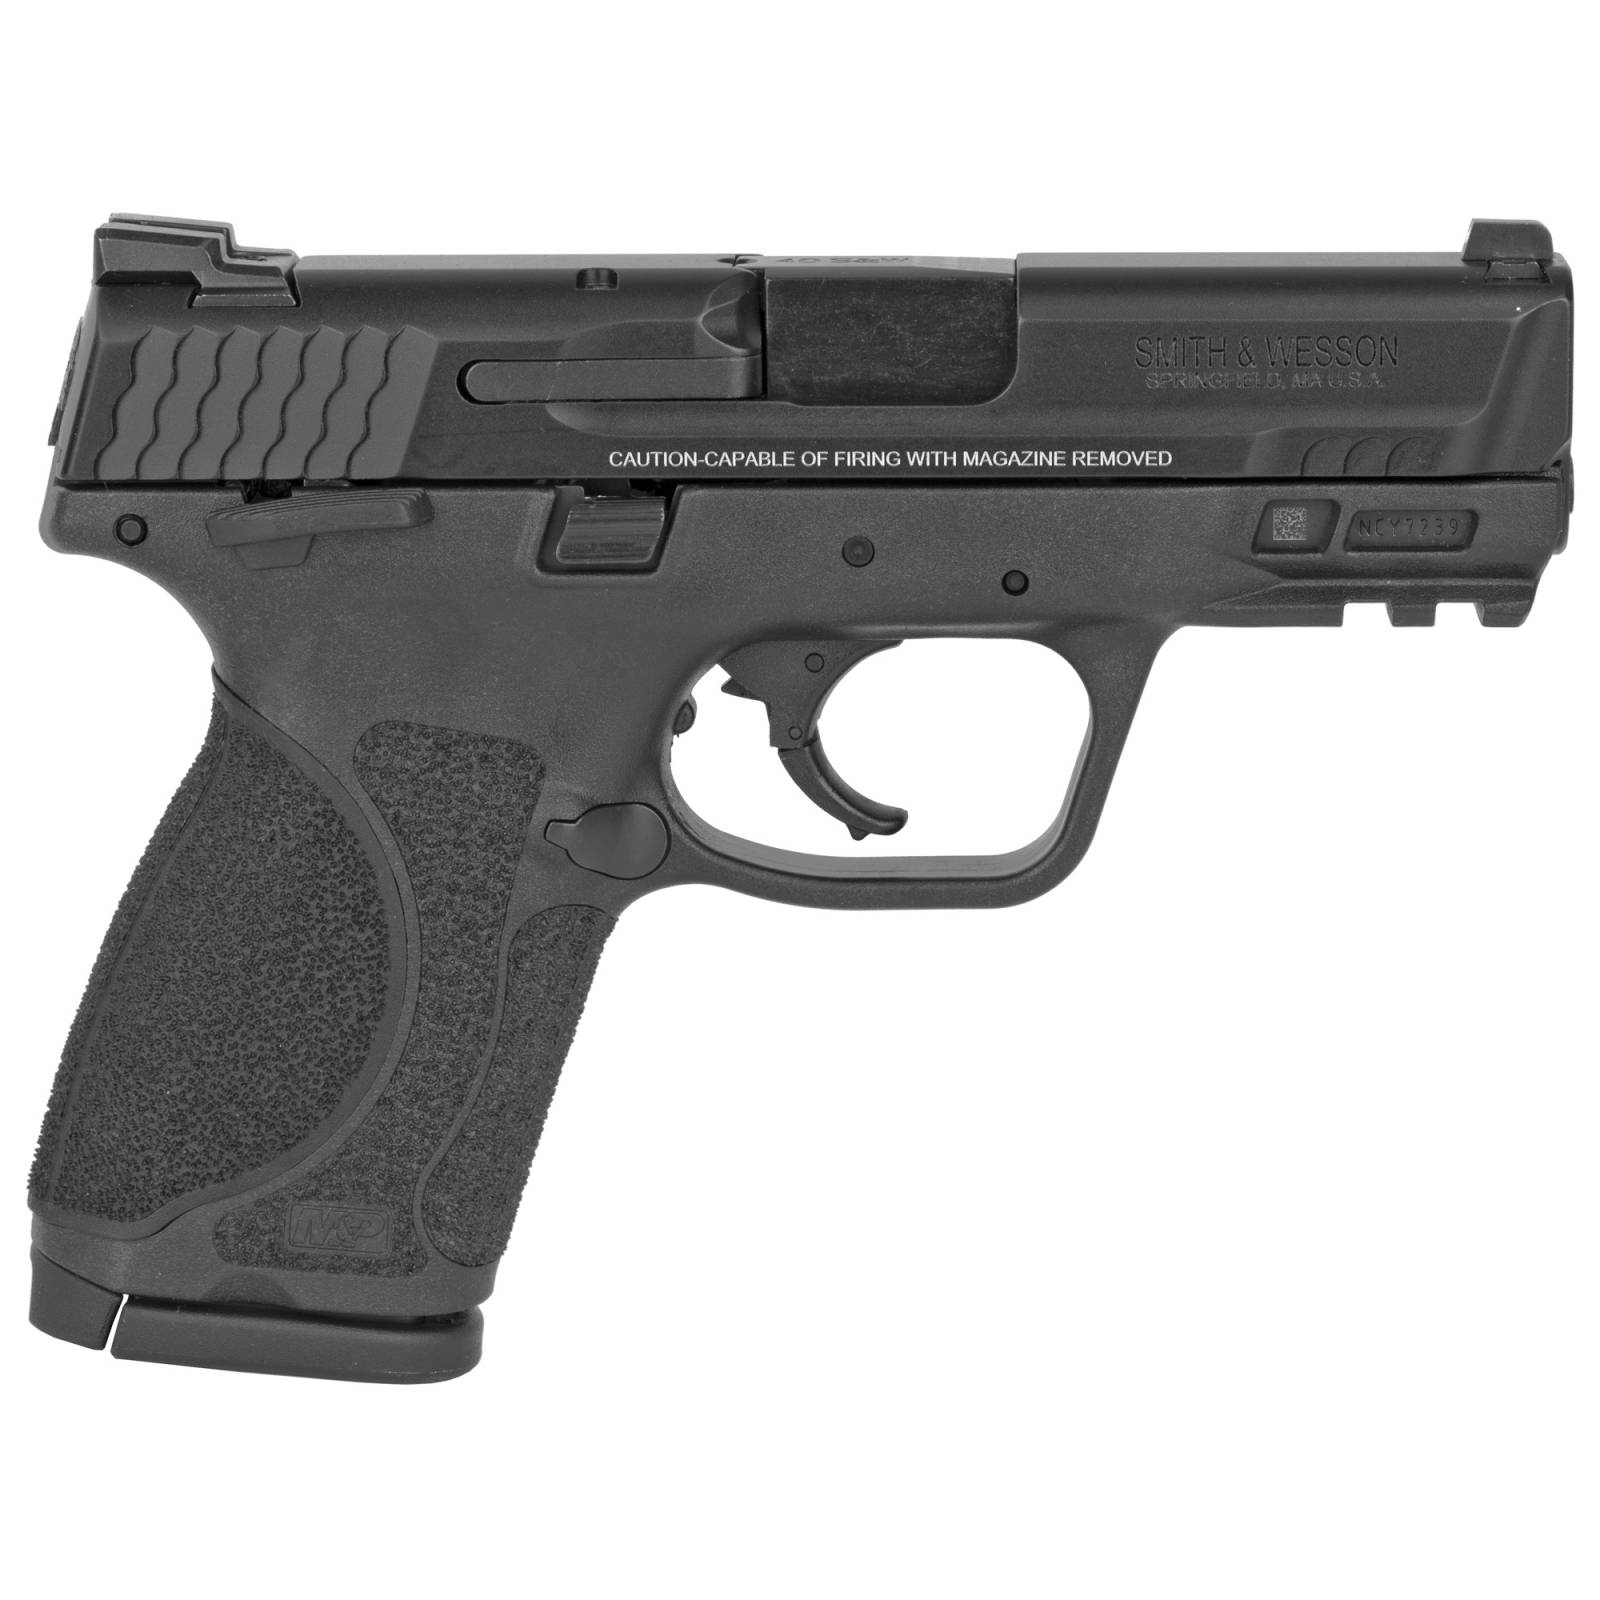 Smith and Wesson M&P M2.0 Compact 40 S&W 3.6in Barrel 13rd (2) Mags ...